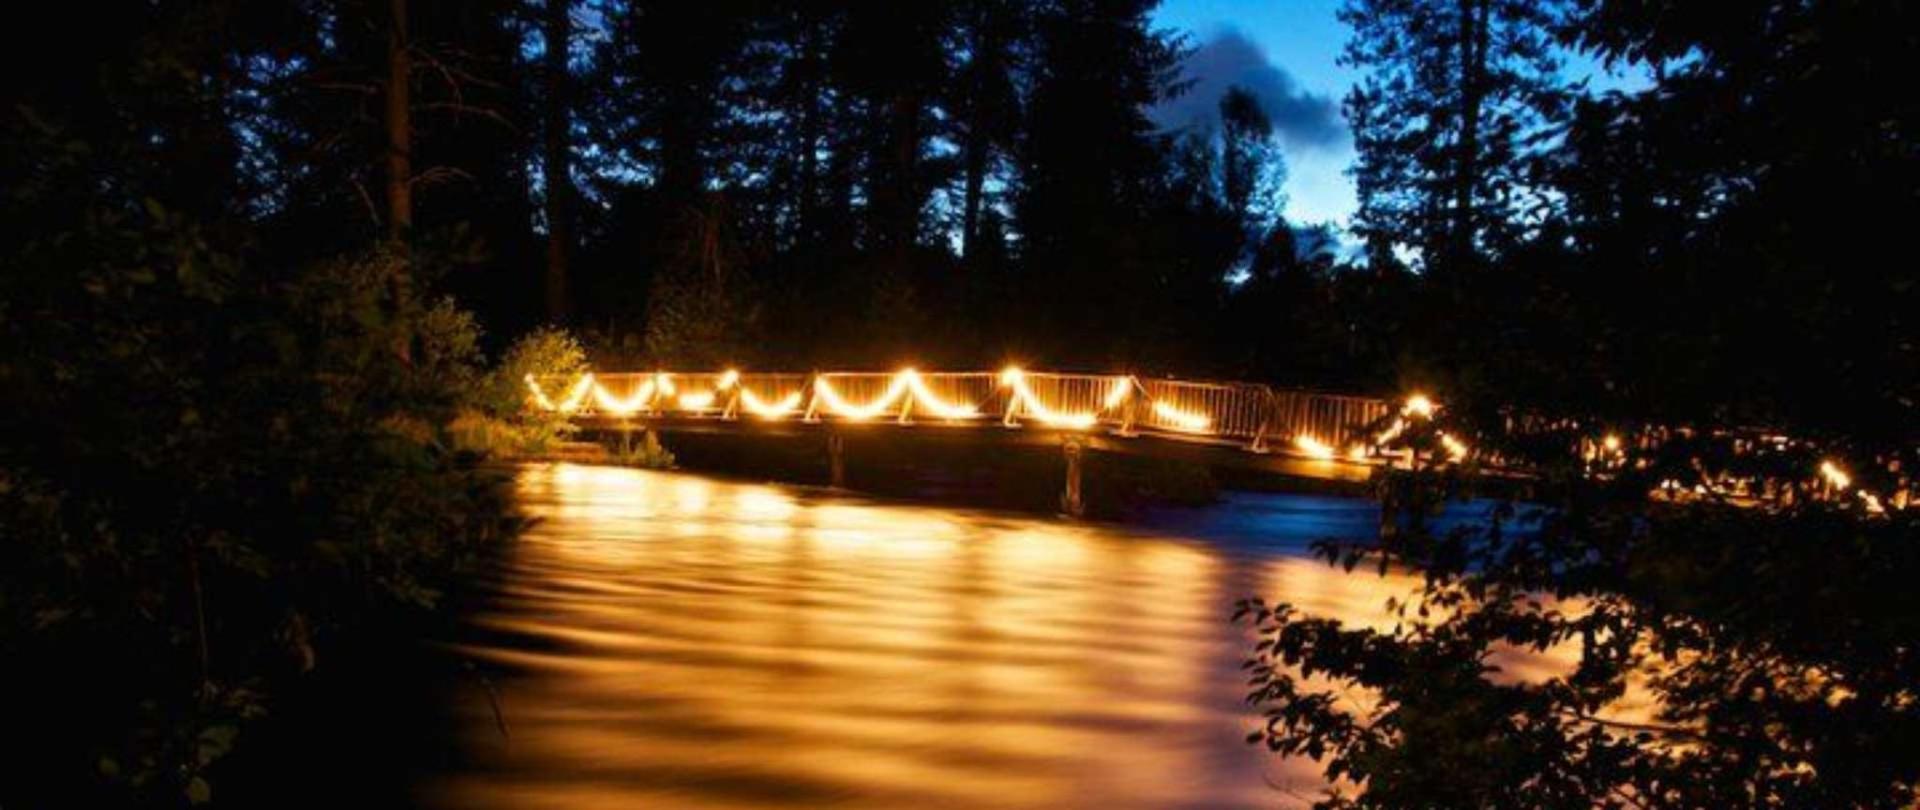 The foot bridge at Cold Springs Resort is beautifully illuminated at night, guiding guests back to their cabins and RVs